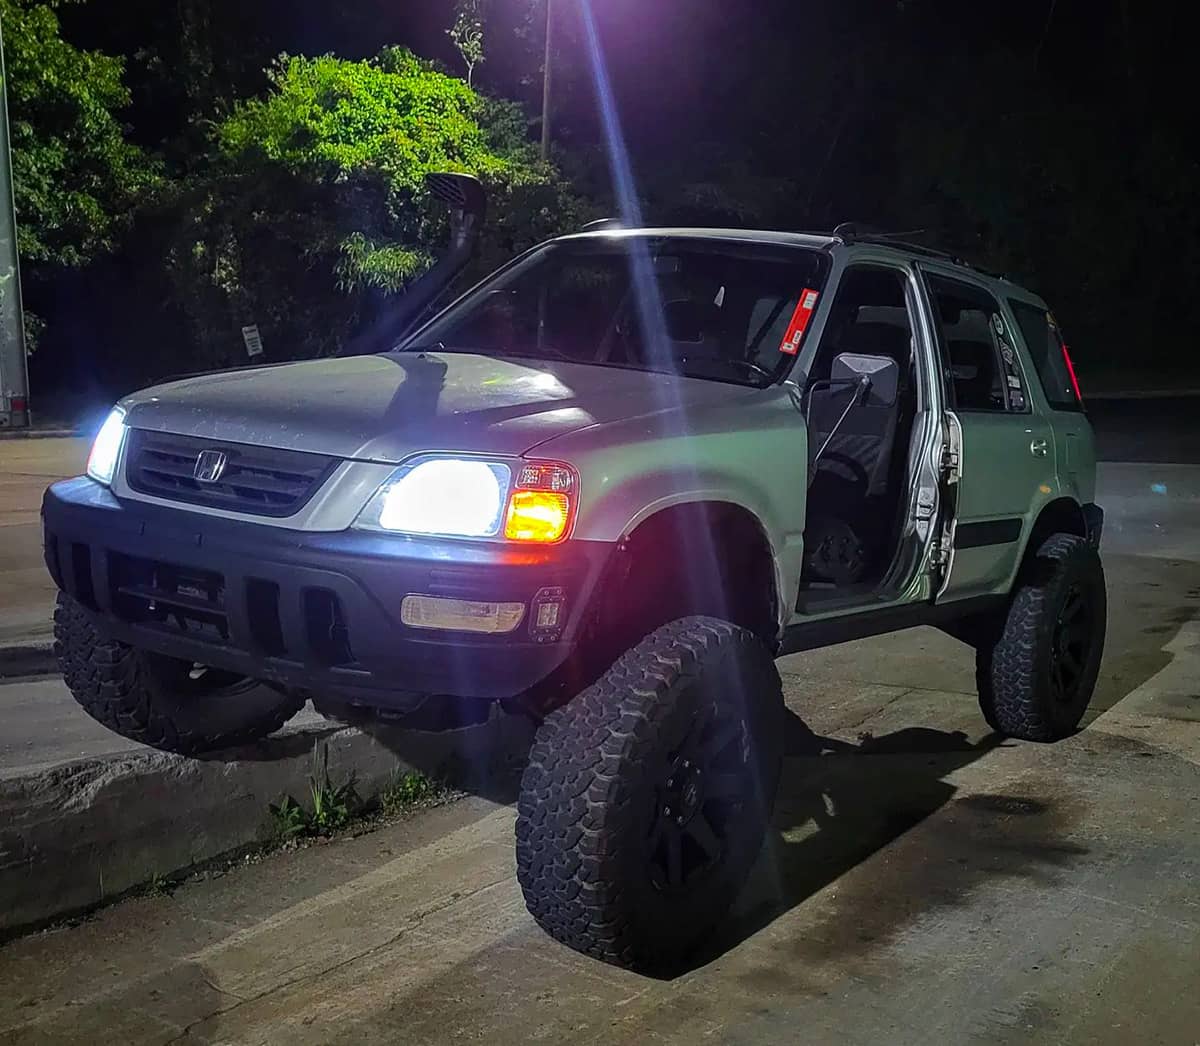 Offroading in a lifted Honda CRV with 4x4 modifications